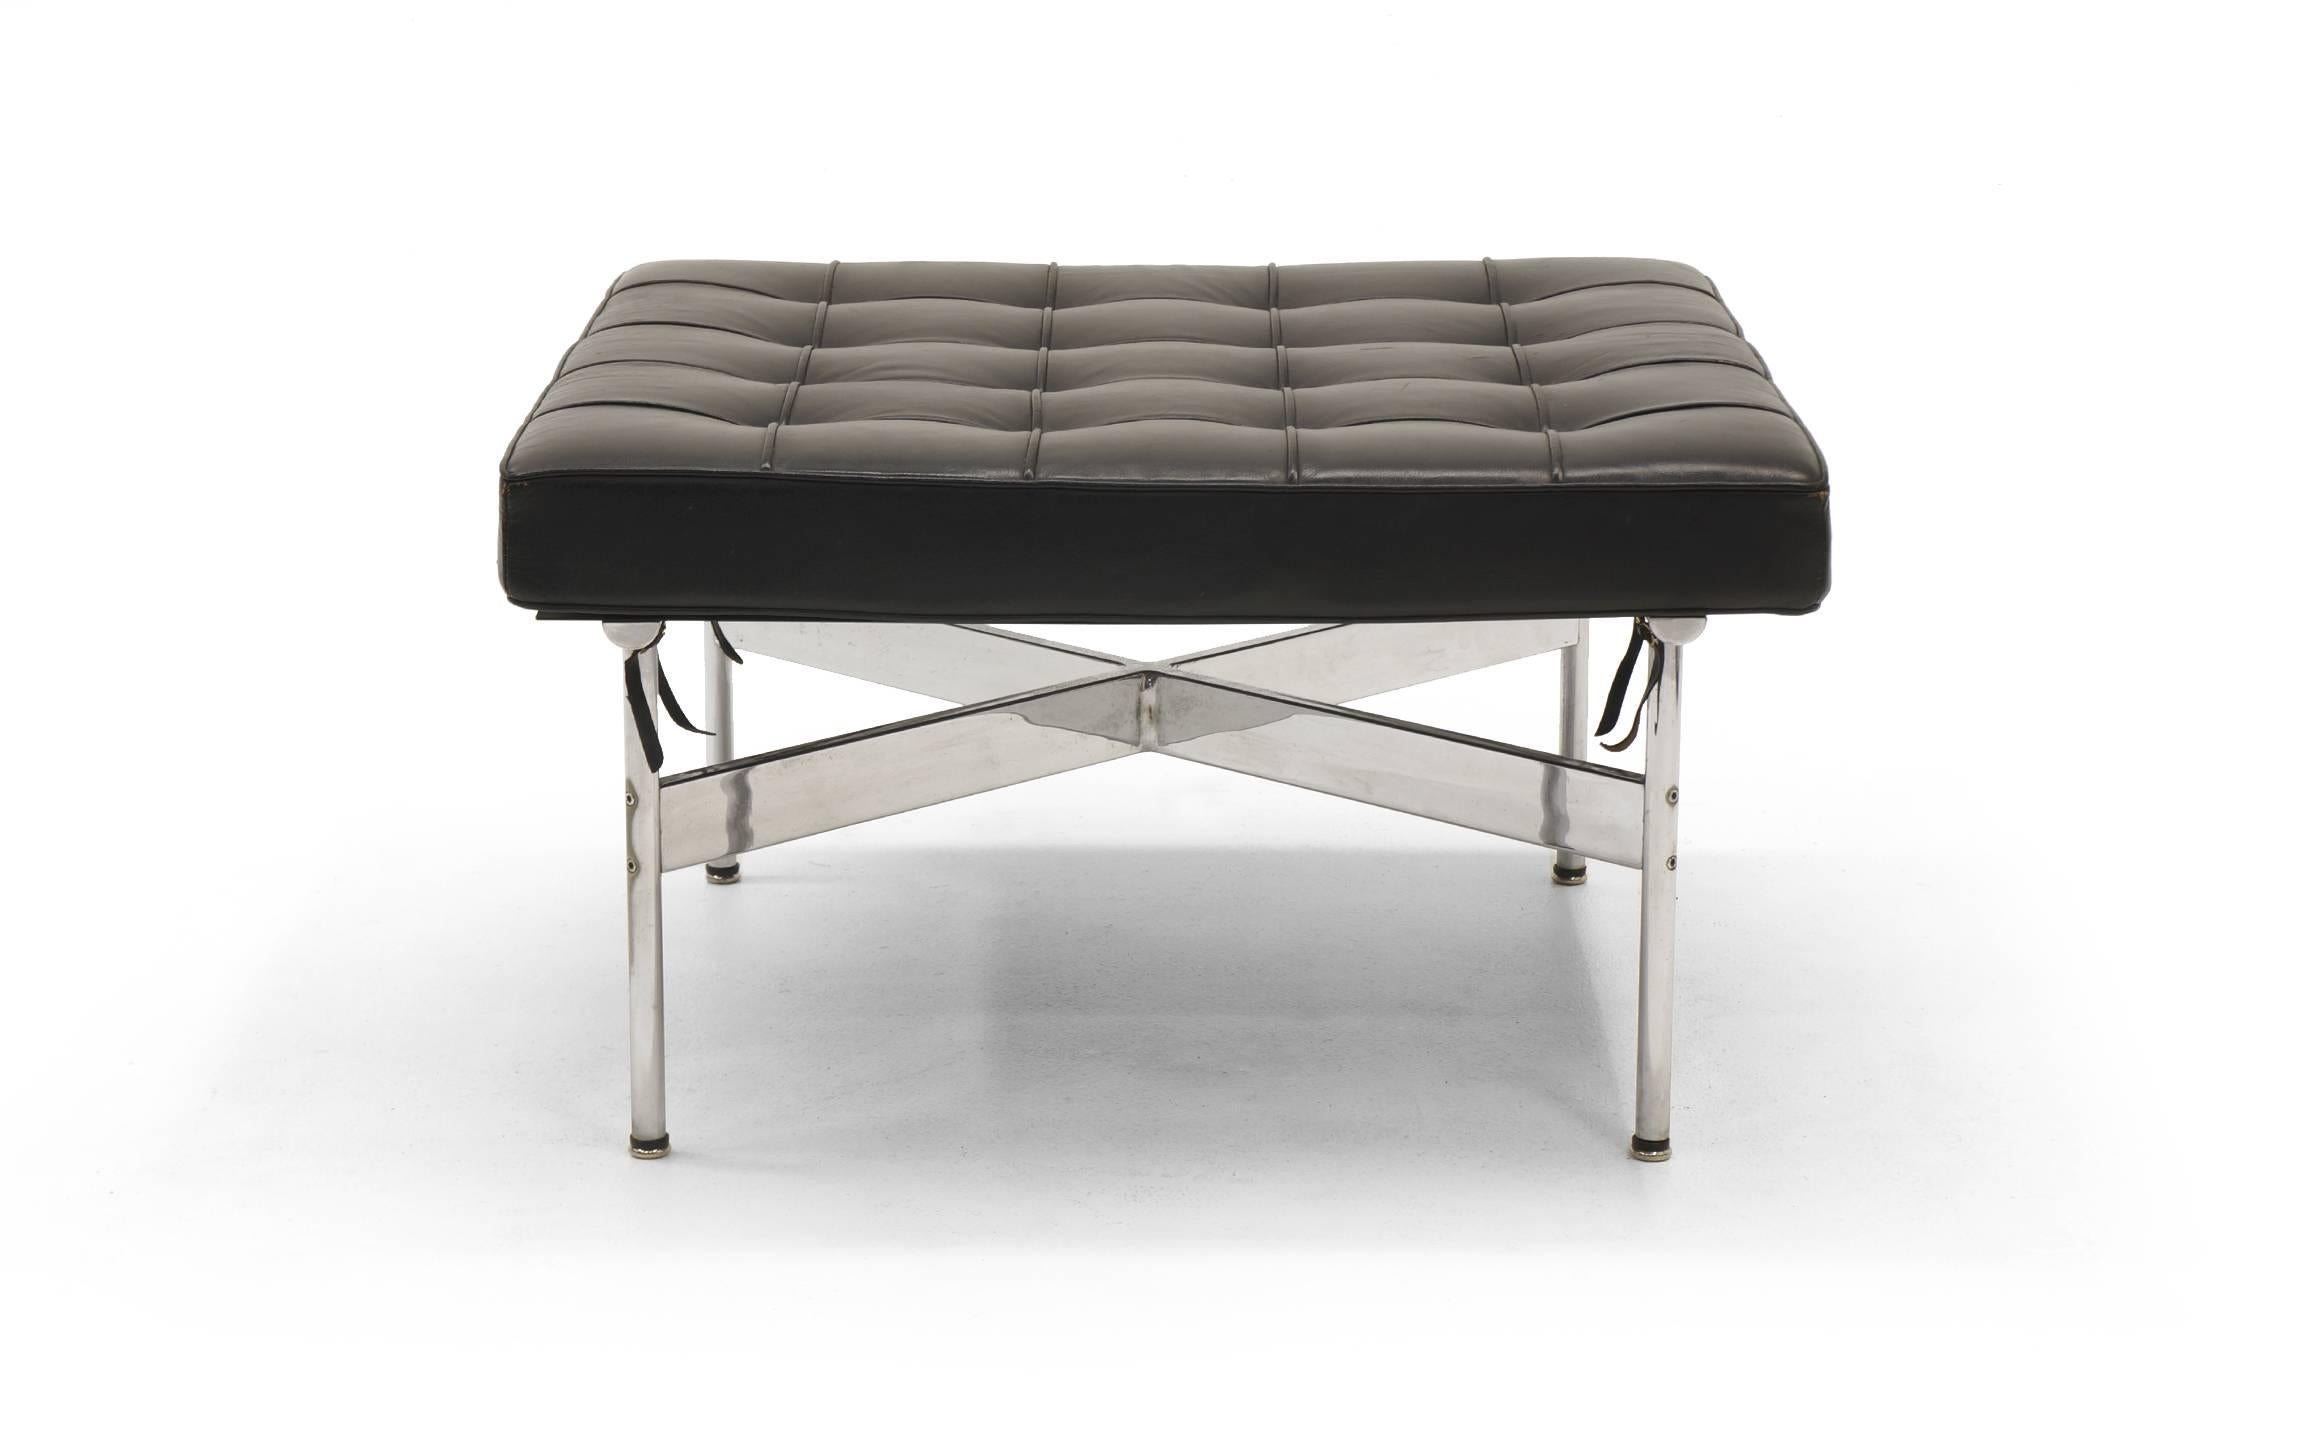 Original black leather ottoman / stool, model 21-LC, from the Architectural Group One line designed by William Katavolos, Ross Littell and Douglas Kelley for Laverne International. Chromed steel frame.